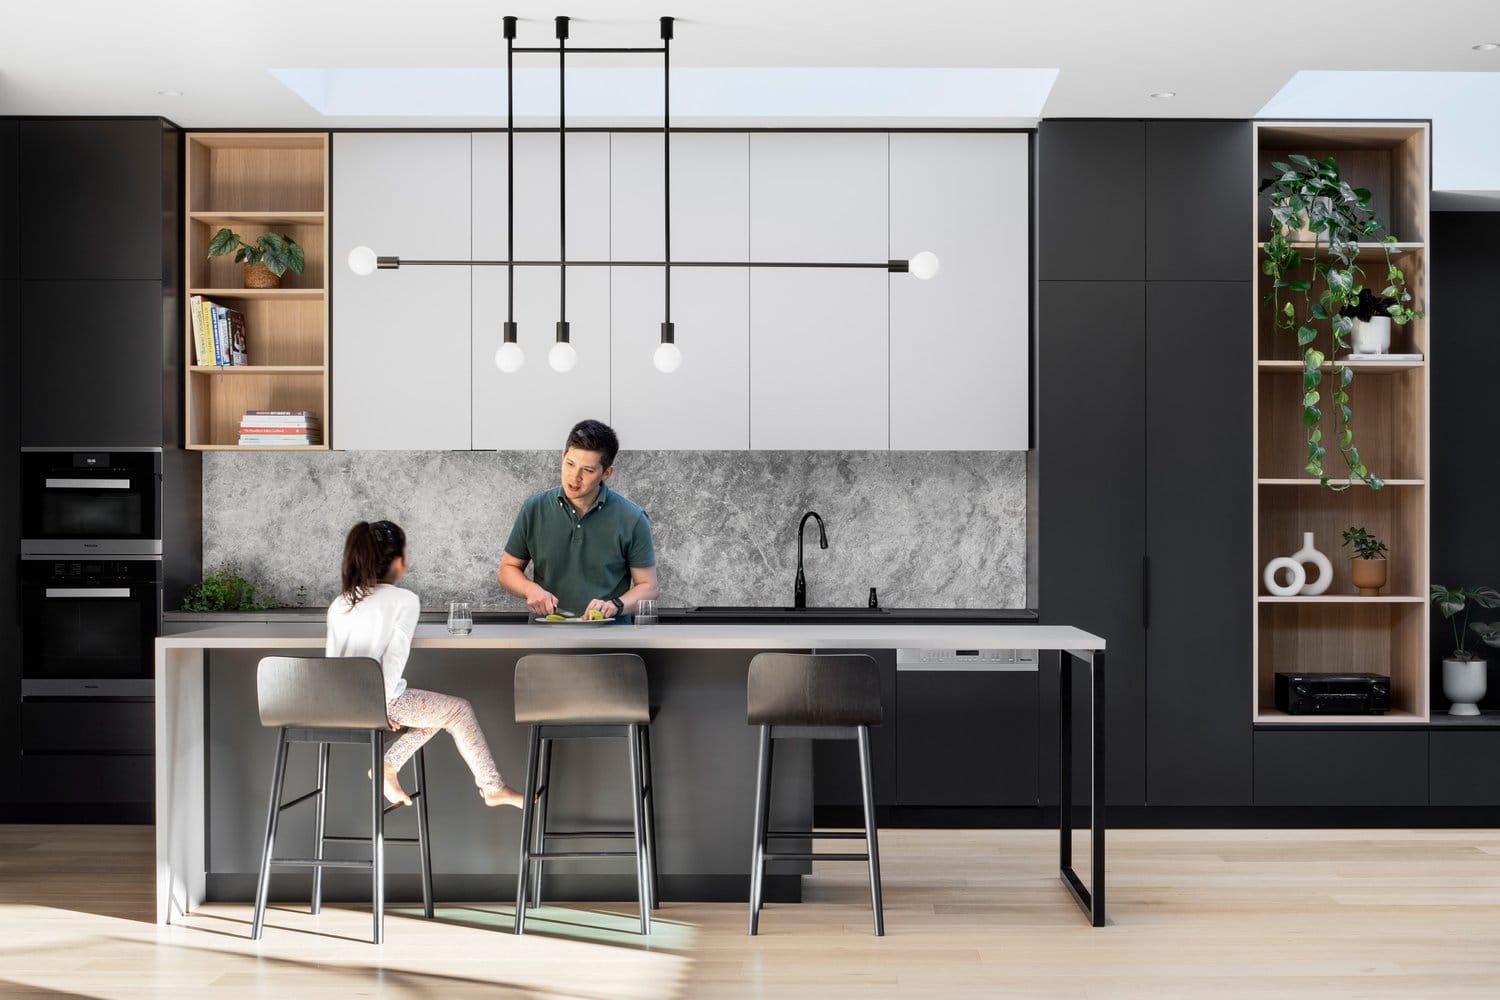 Dickens Street Residence. Photography by Tatjana Plitt. Kitchen with black cabinetry, pale timber floors, stone splashback and concrete island bench.